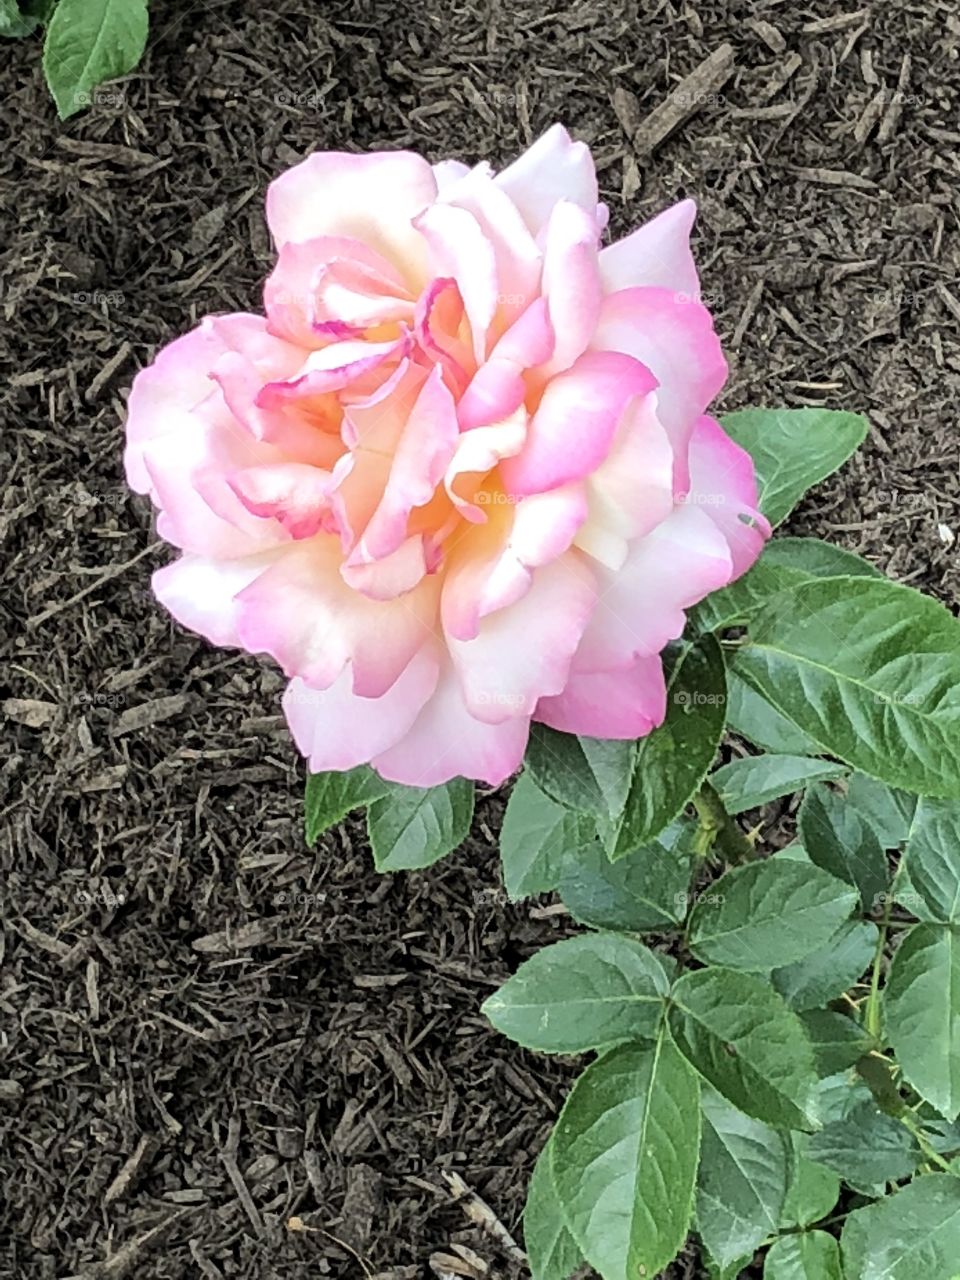 A beautiful pink rose taken from the rose garden in Colonial Park in Somerset, NJ. 